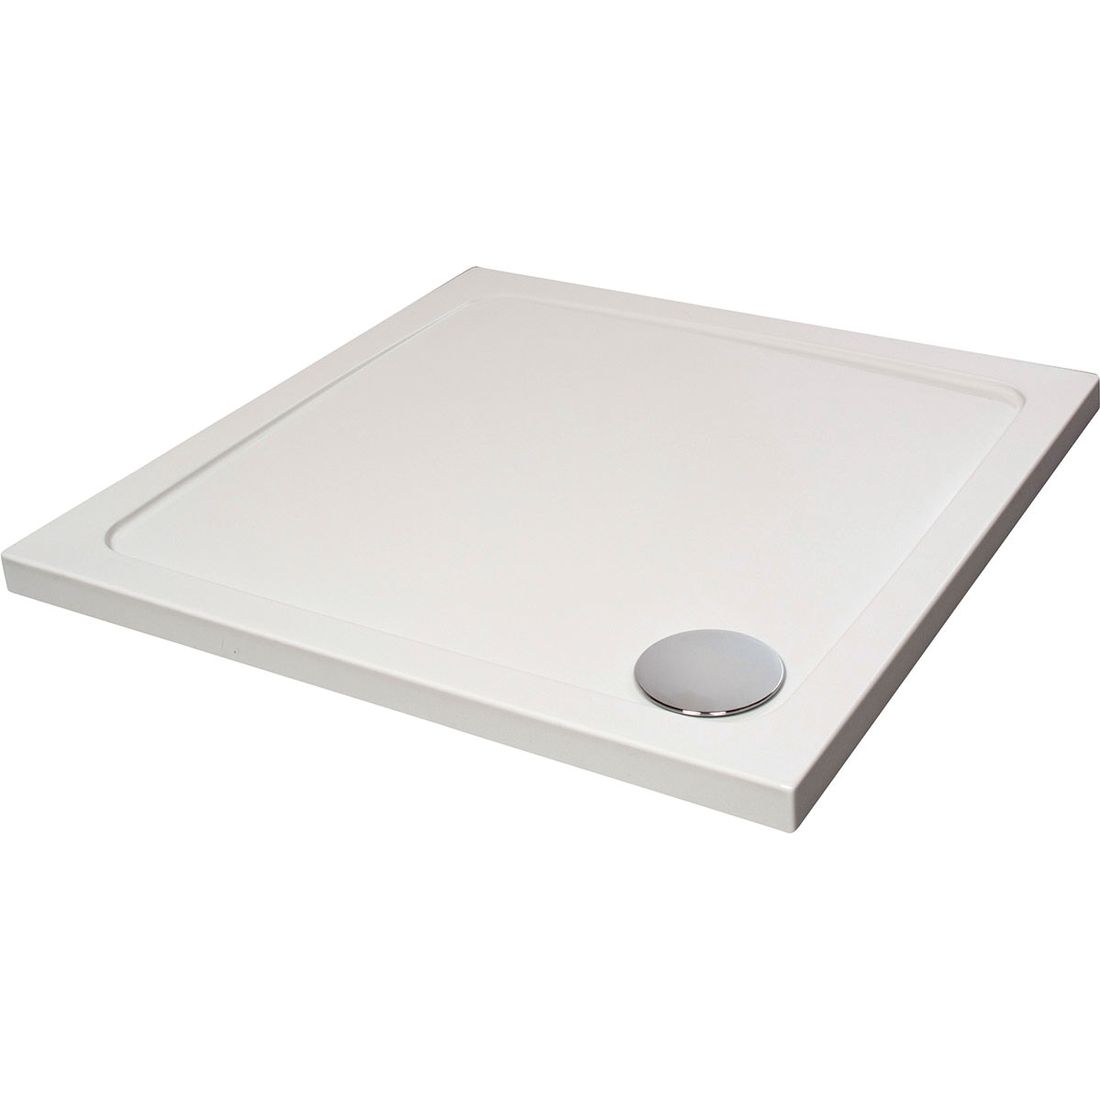 Shower Tray 800 X 800Mm Low Profile Abs White